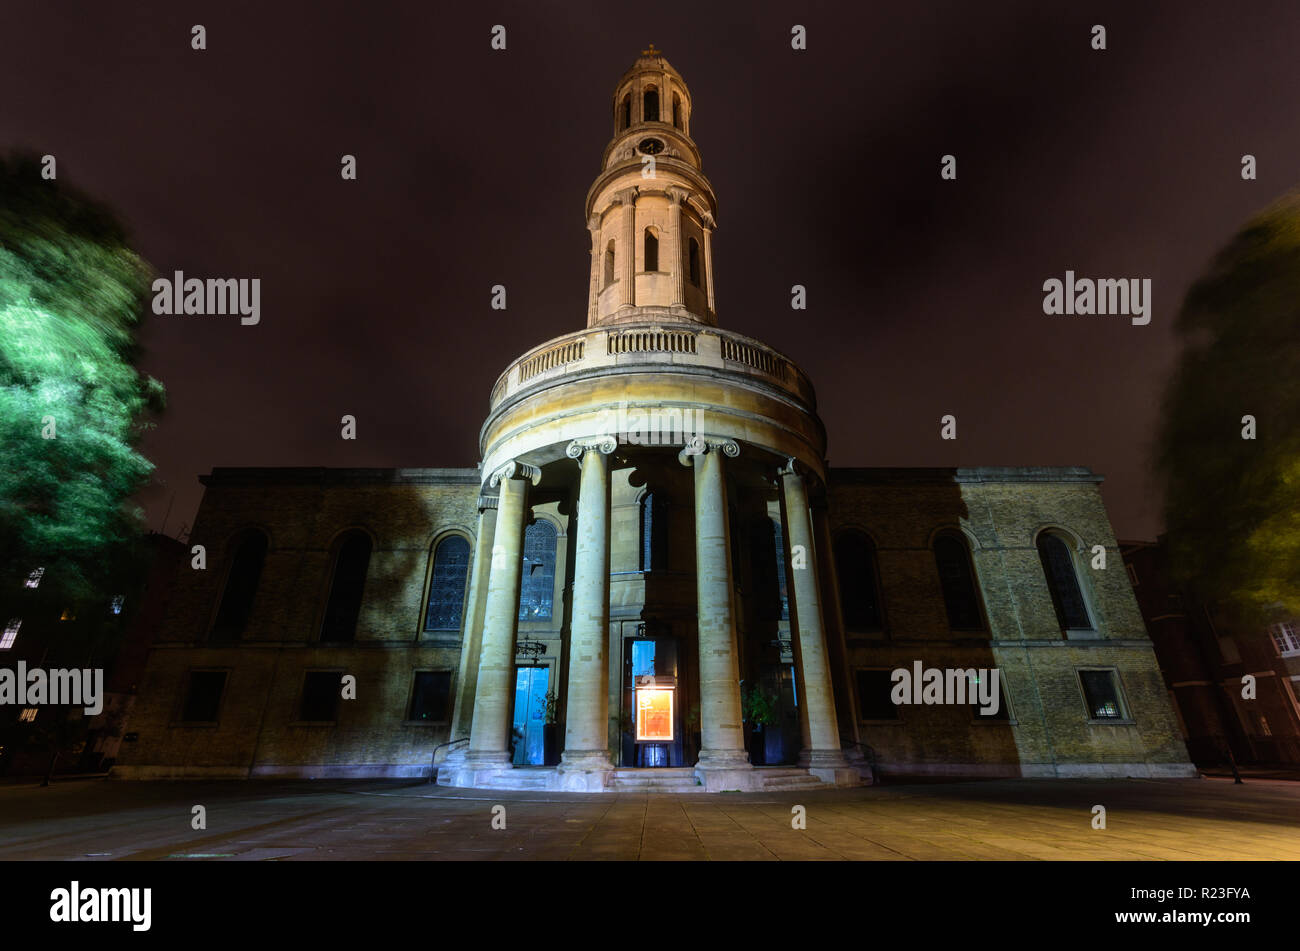 London, England, UK - October 12, 2018: The tower and south face of St Mary's Church is lit at night in Bryanston Square in the Marylebone neighbourho Stock Photo